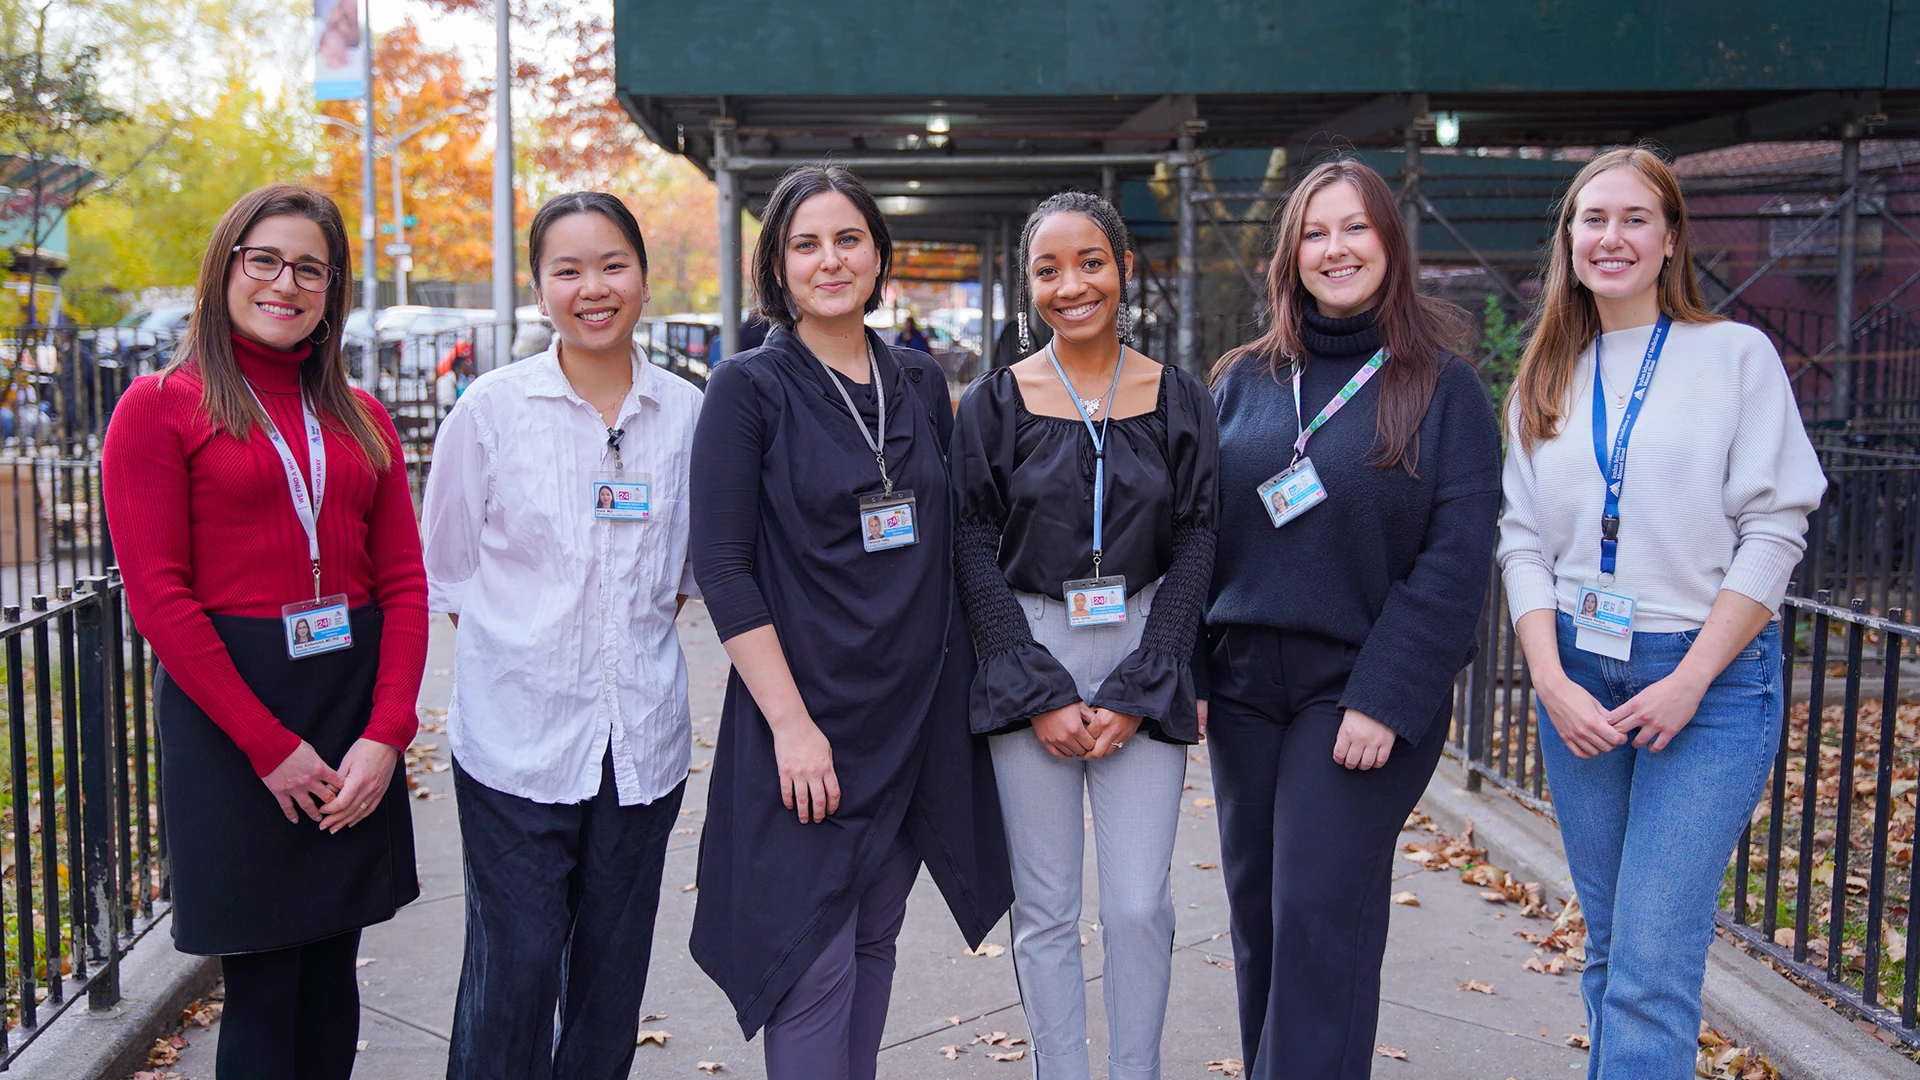 Amy Kontorovich, MD, PhD, left, at an hATTR awareness event at a New York City Housing Authority senior center in Upper Manhattan, with team members, from left, student Kiana Moi, genetic counselor Veronica Fettig, and students Nirel Spivey, Emily Henderson, and Anastasia Pavlyuk.